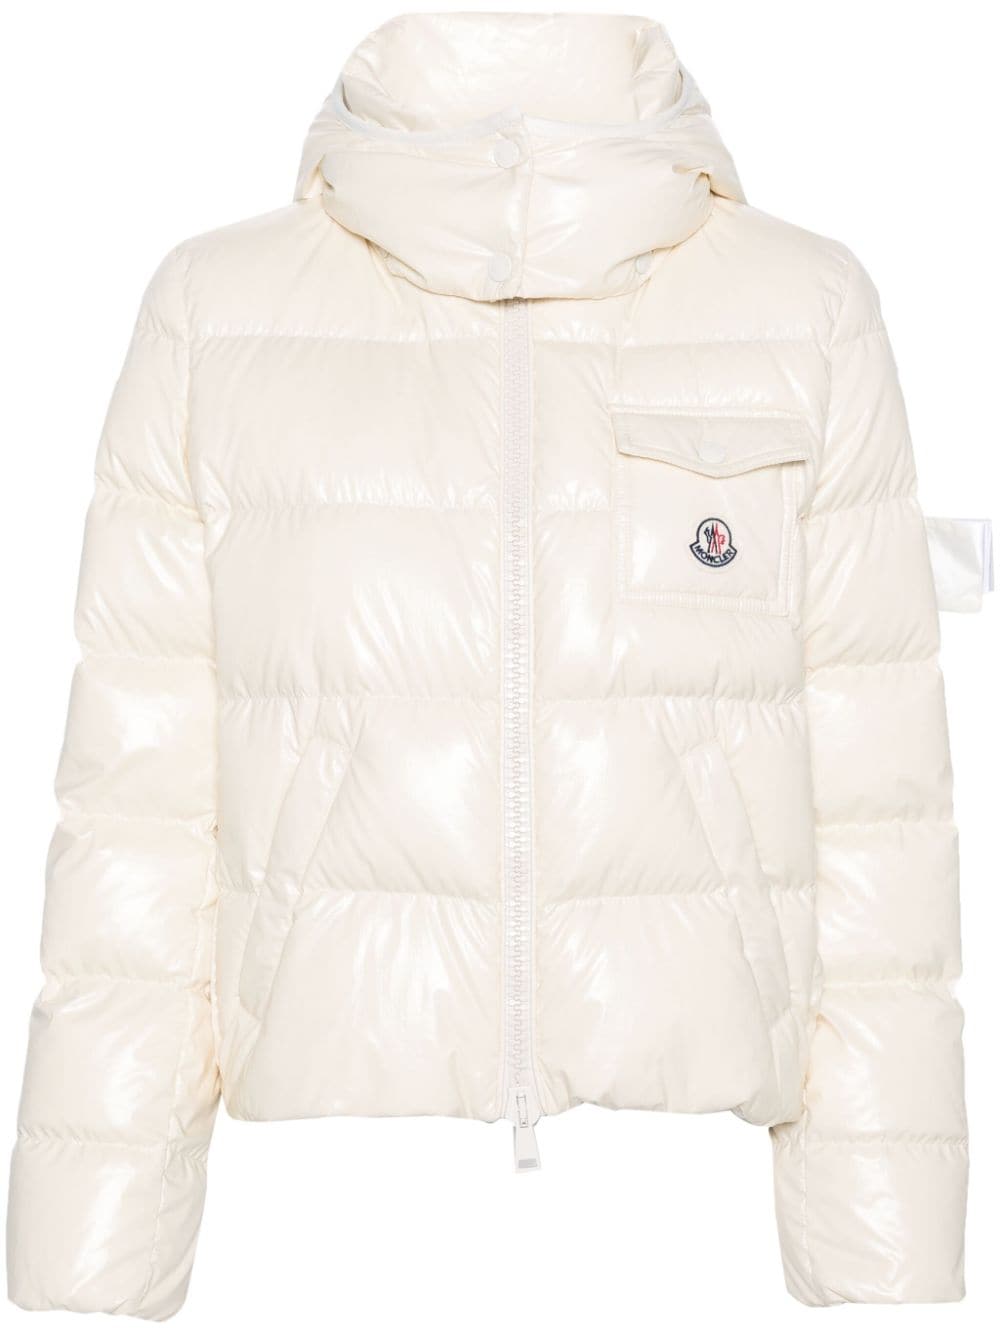 Moncler Andro hooded jacket - Neutrals von Moncler